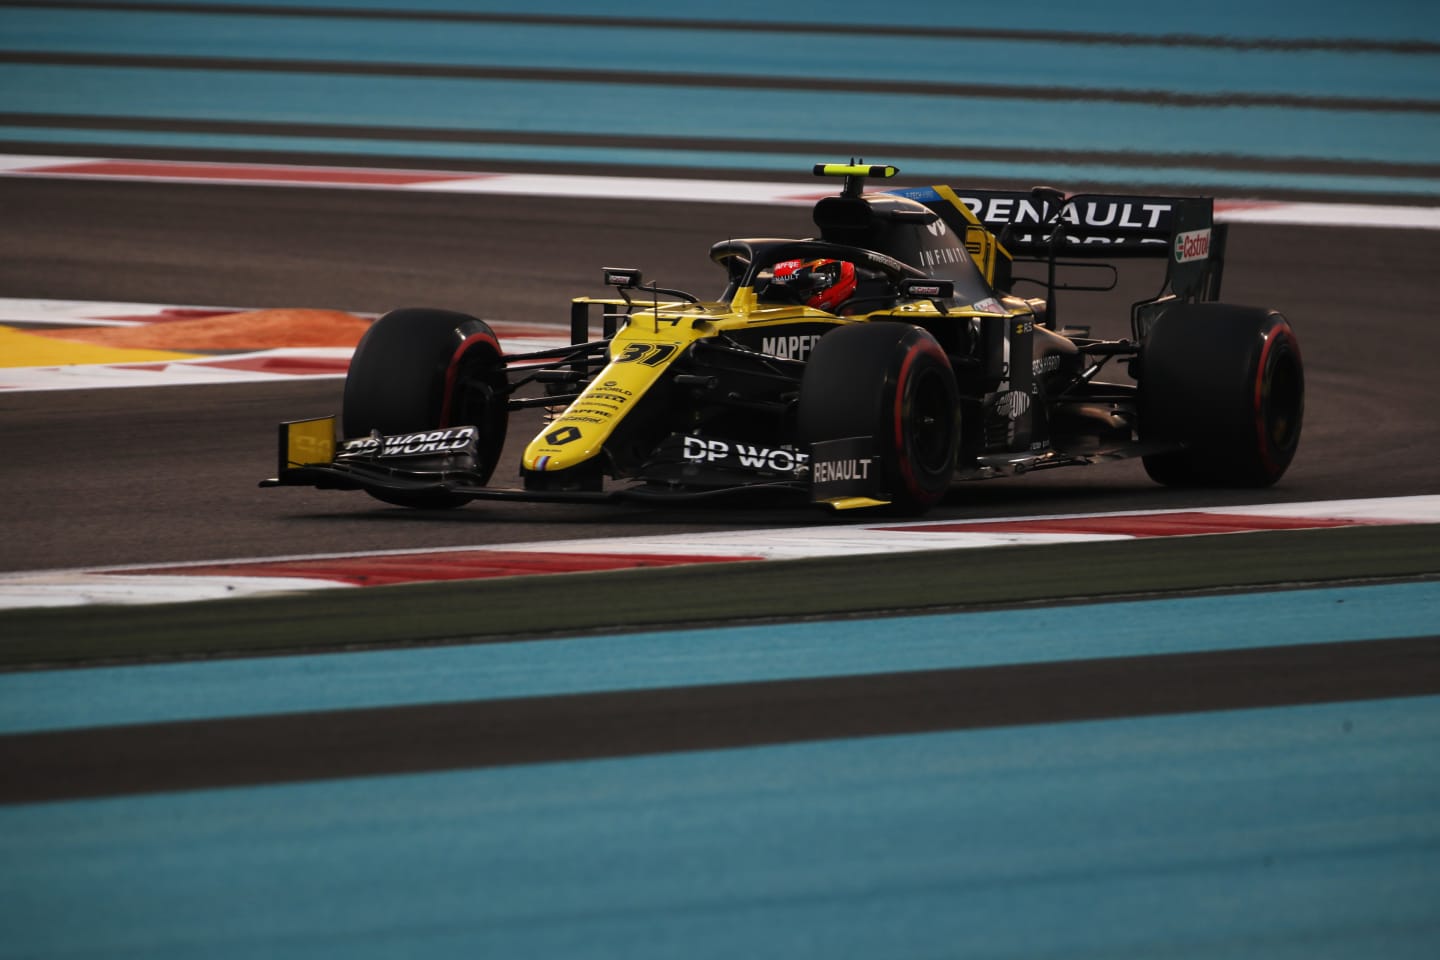 ABU DHABI, UNITED ARAB EMIRATES - DECEMBER 12: Esteban Ocon of France driving the (31) Renault Sport Formula One Team RS20 on track during qualifying ahead of the F1 Grand Prix of Abu Dhabi at Yas Marina Circuit on December 12, 2020 in Abu Dhabi, United Arab Emirates. (Photo by Hamad I Mohammed - Pool/Getty Images)